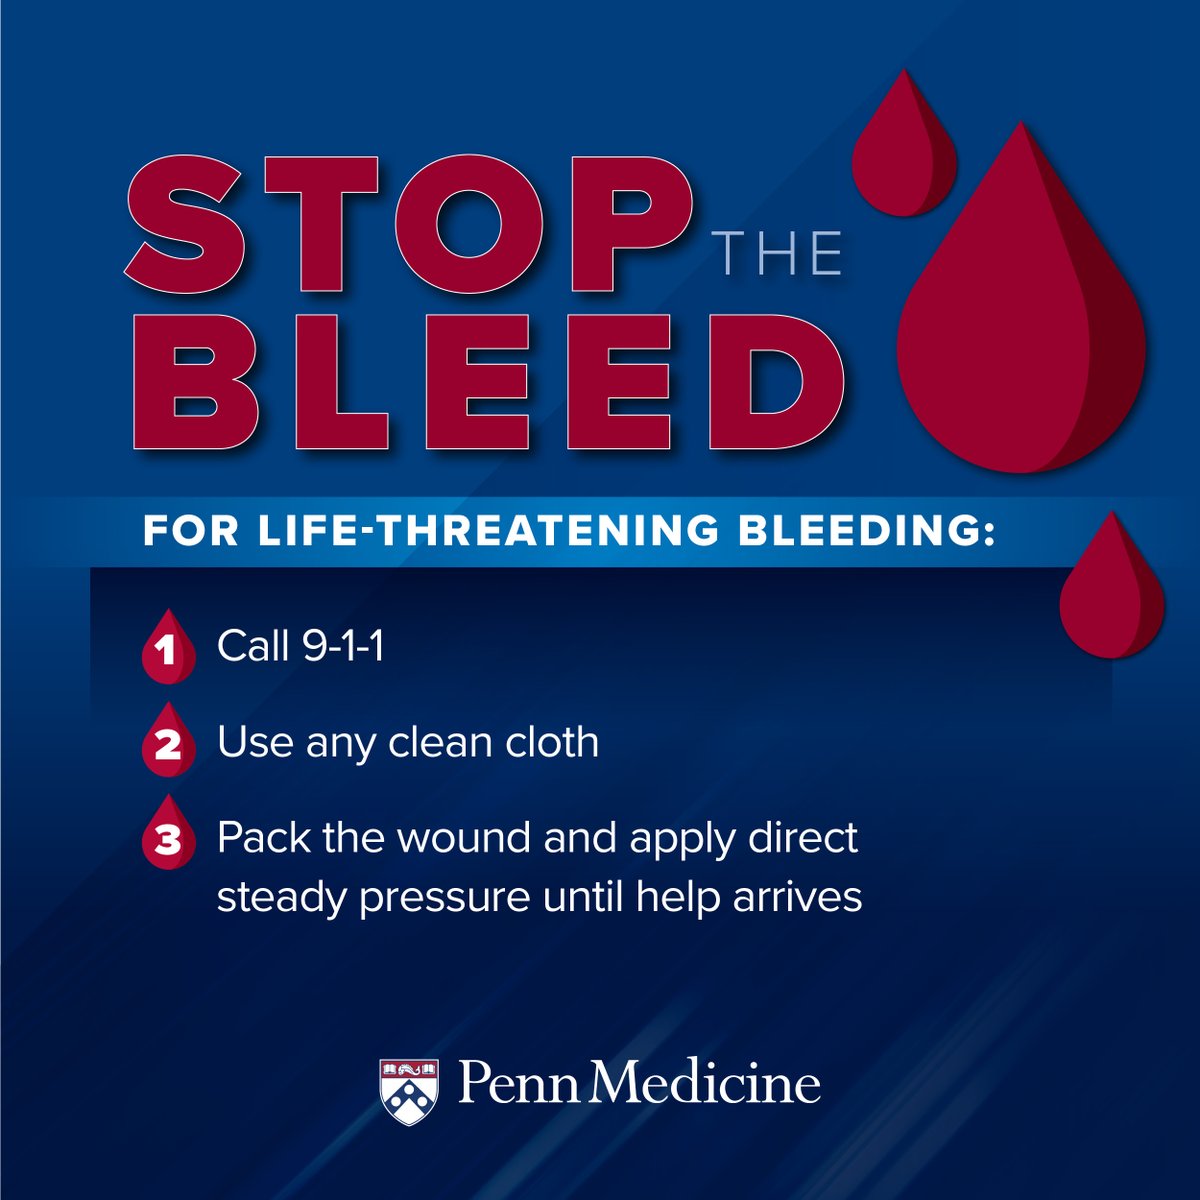 Because every moment counts during a bleeding emergency, knowing how to take immediate action is a vital skill that could save a life. Learn about bleeding control techniques at STOP THE BLEED training session hosted by the Penn Trauma Center. Sign up at spr.ly/6186OWsz0